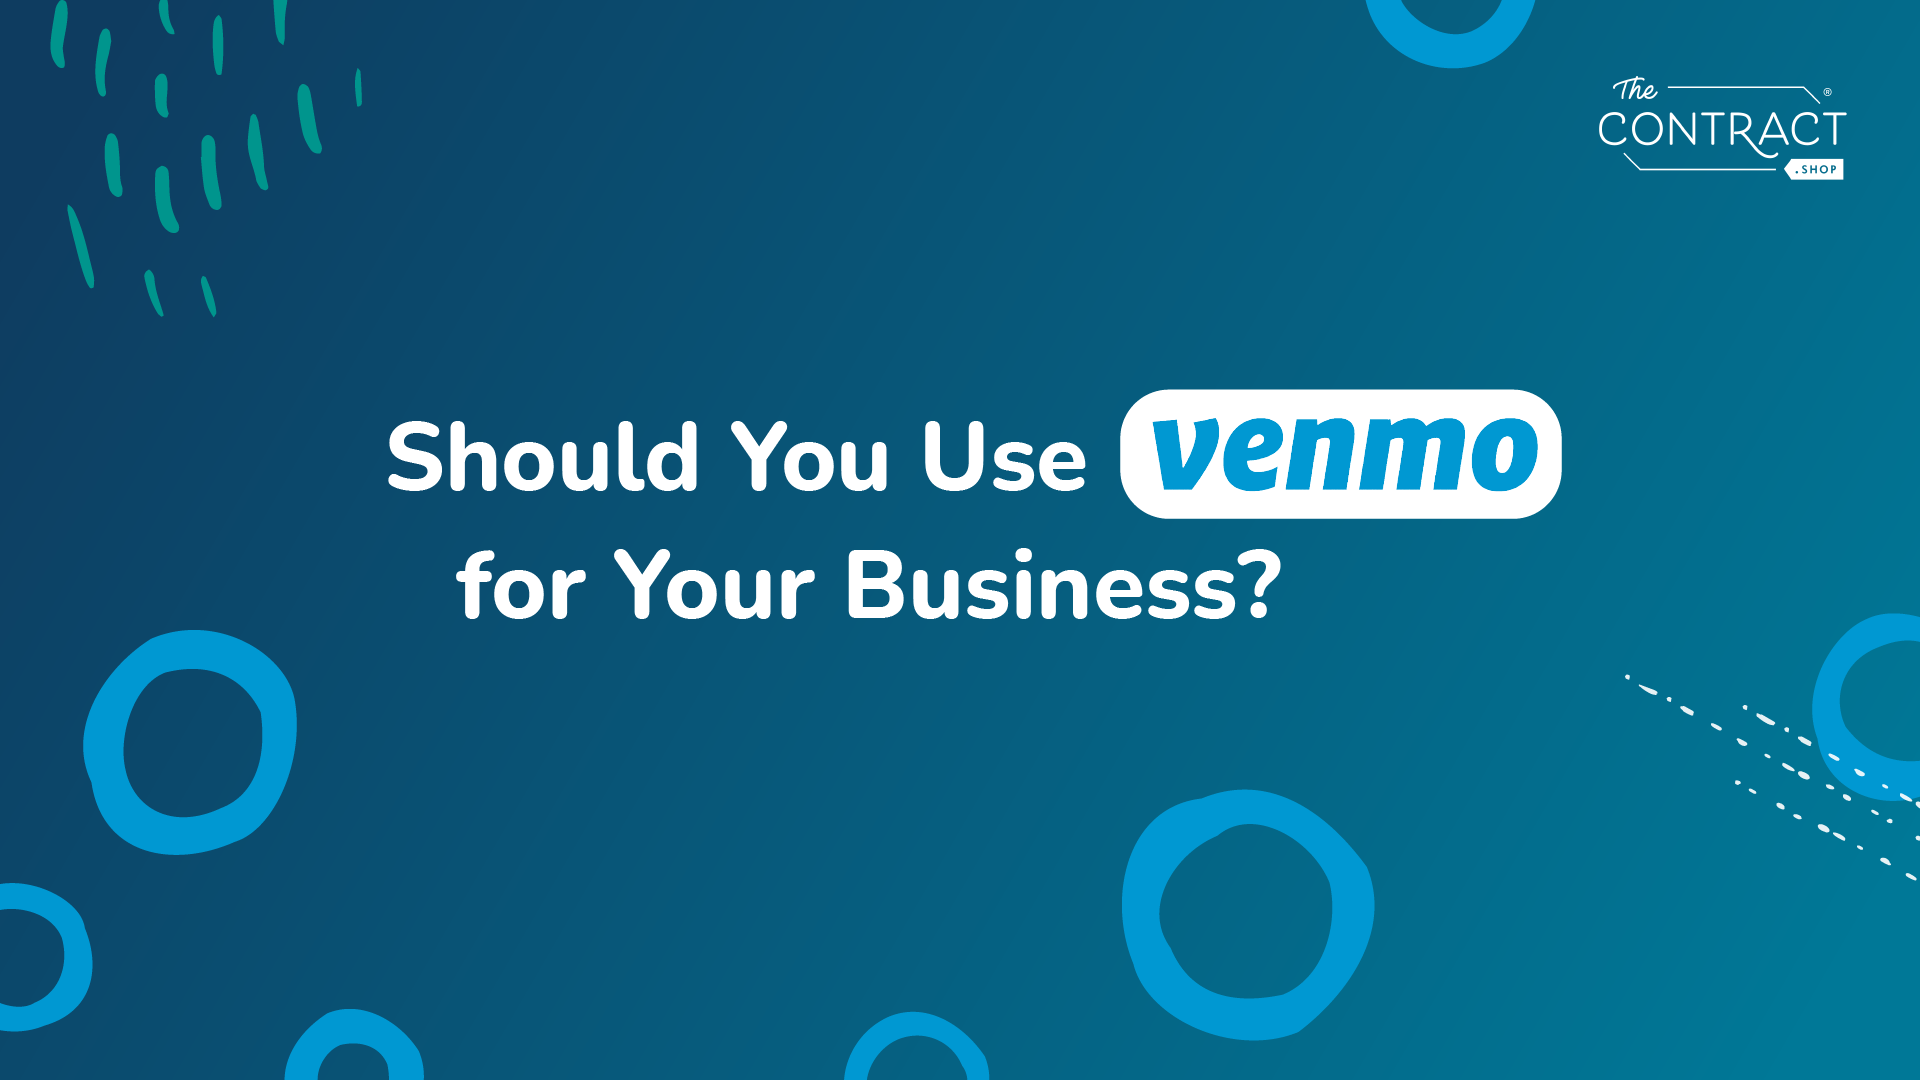 Should You Use Venmo for Your Business?